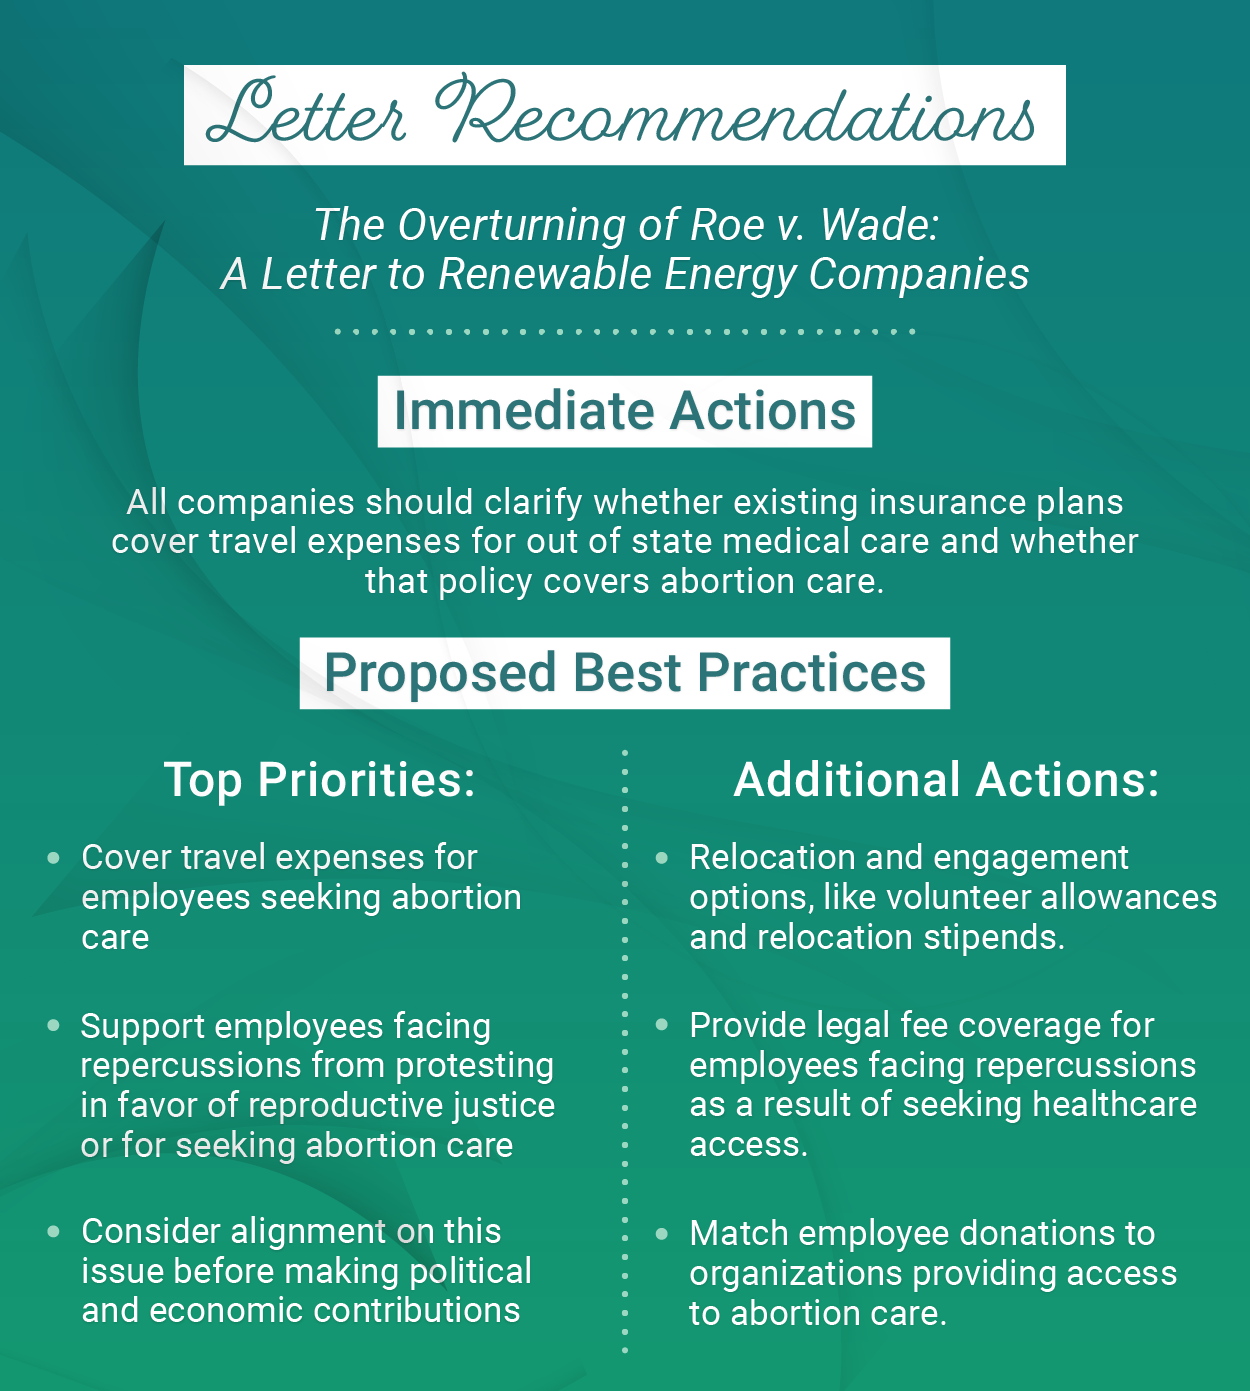 Letter recommendations.